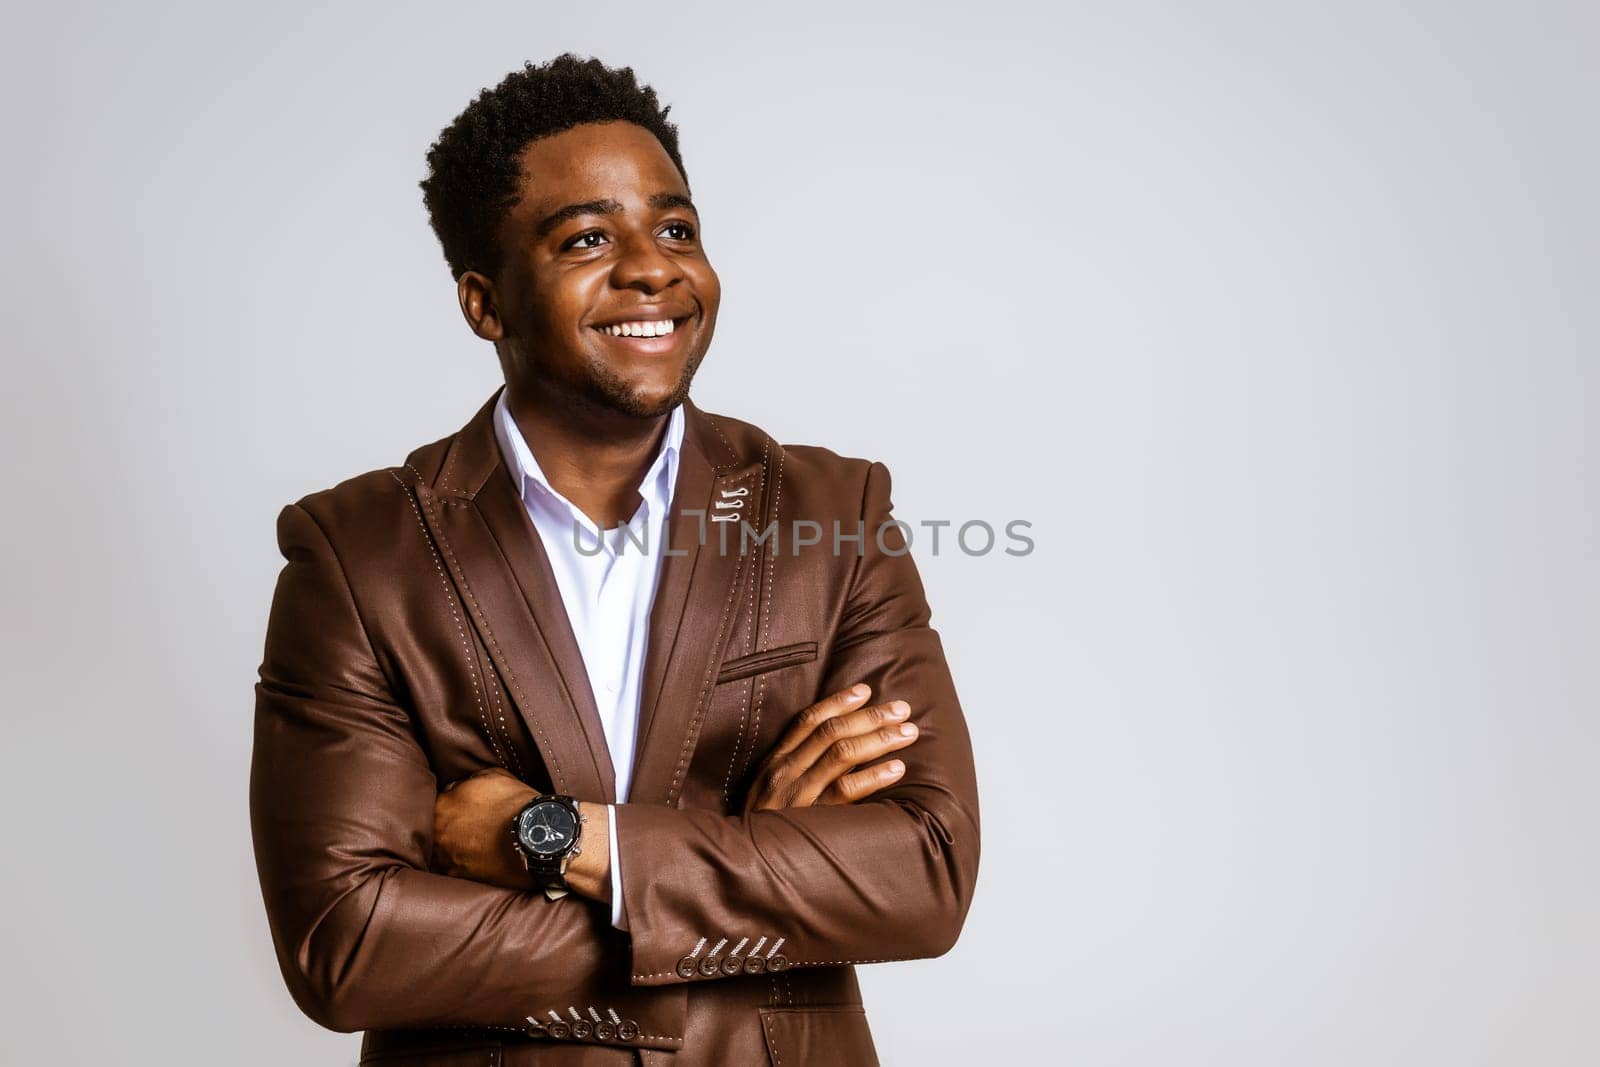 Portrait of happy businessman who is smiling and looking at camera. Copy space on image for your text or advert.